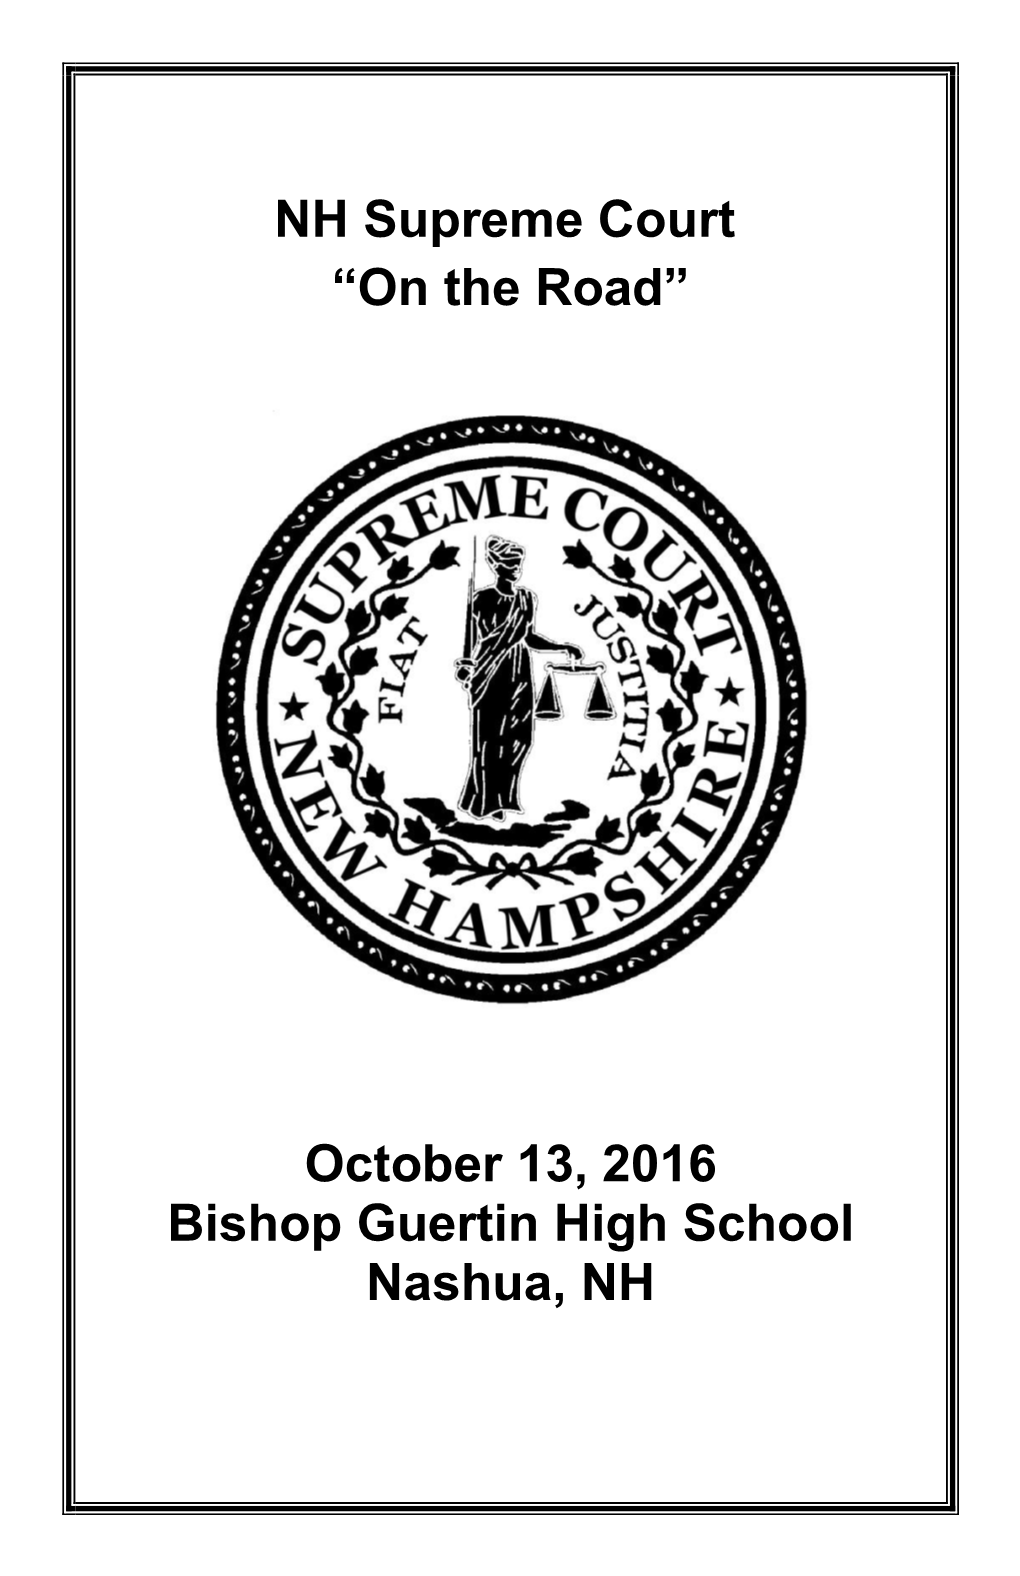 NH Supreme Court “On the Road” October 13, 2016 Bishop Guertin